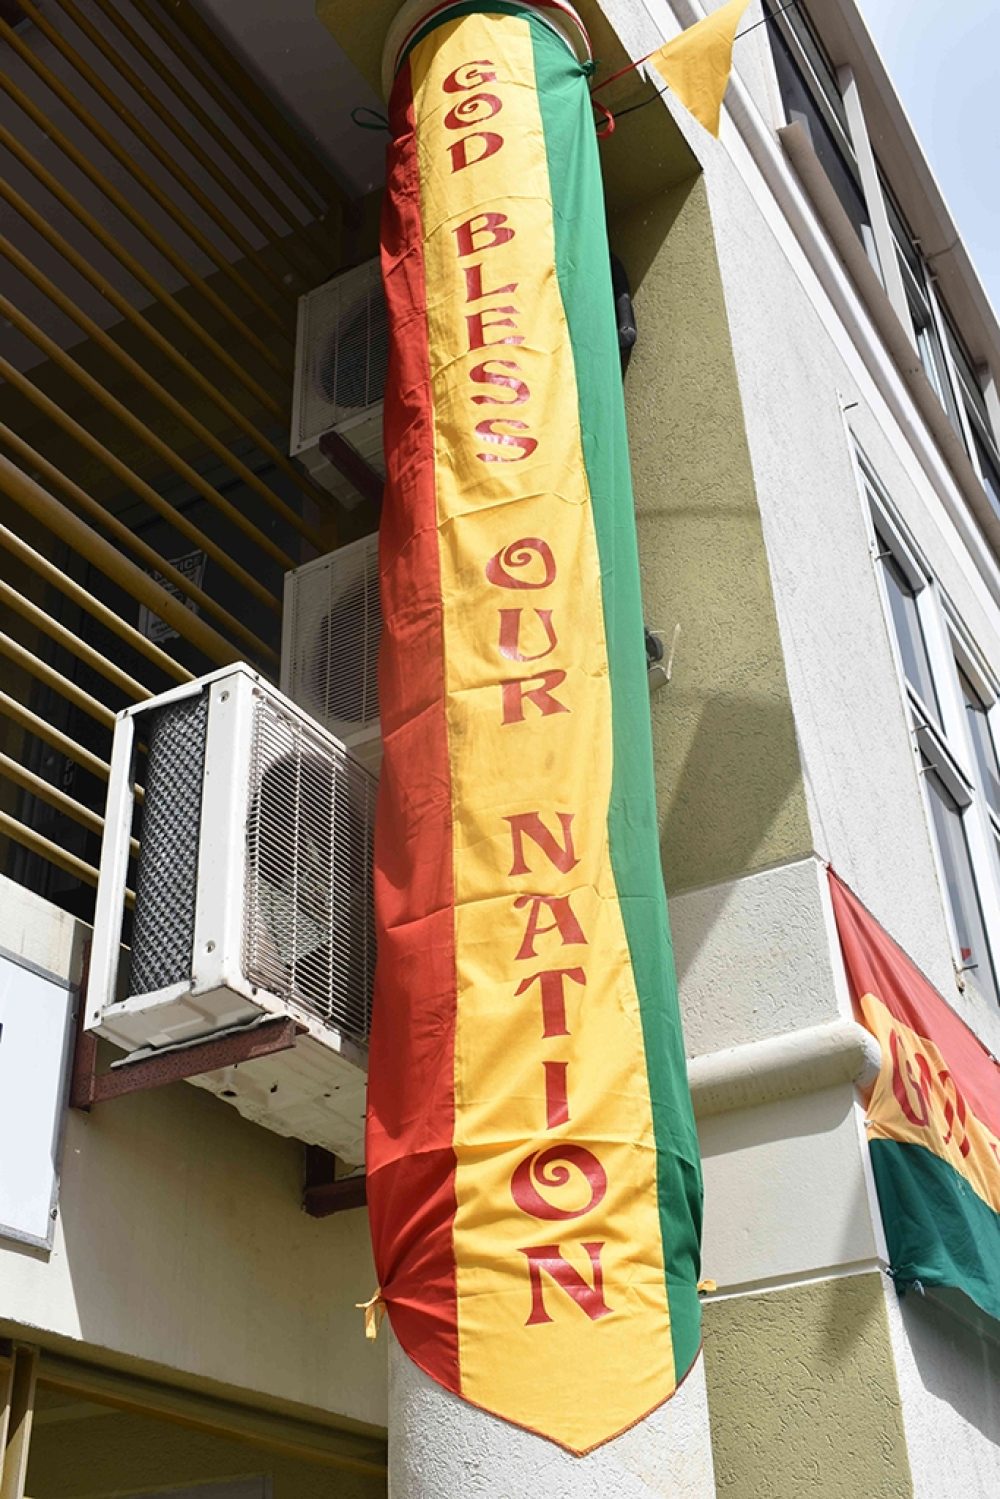 God Bless Our Nation: a banner displayed to mark the 48th anniversary of Grenada’s independence, Photo ©David Katz